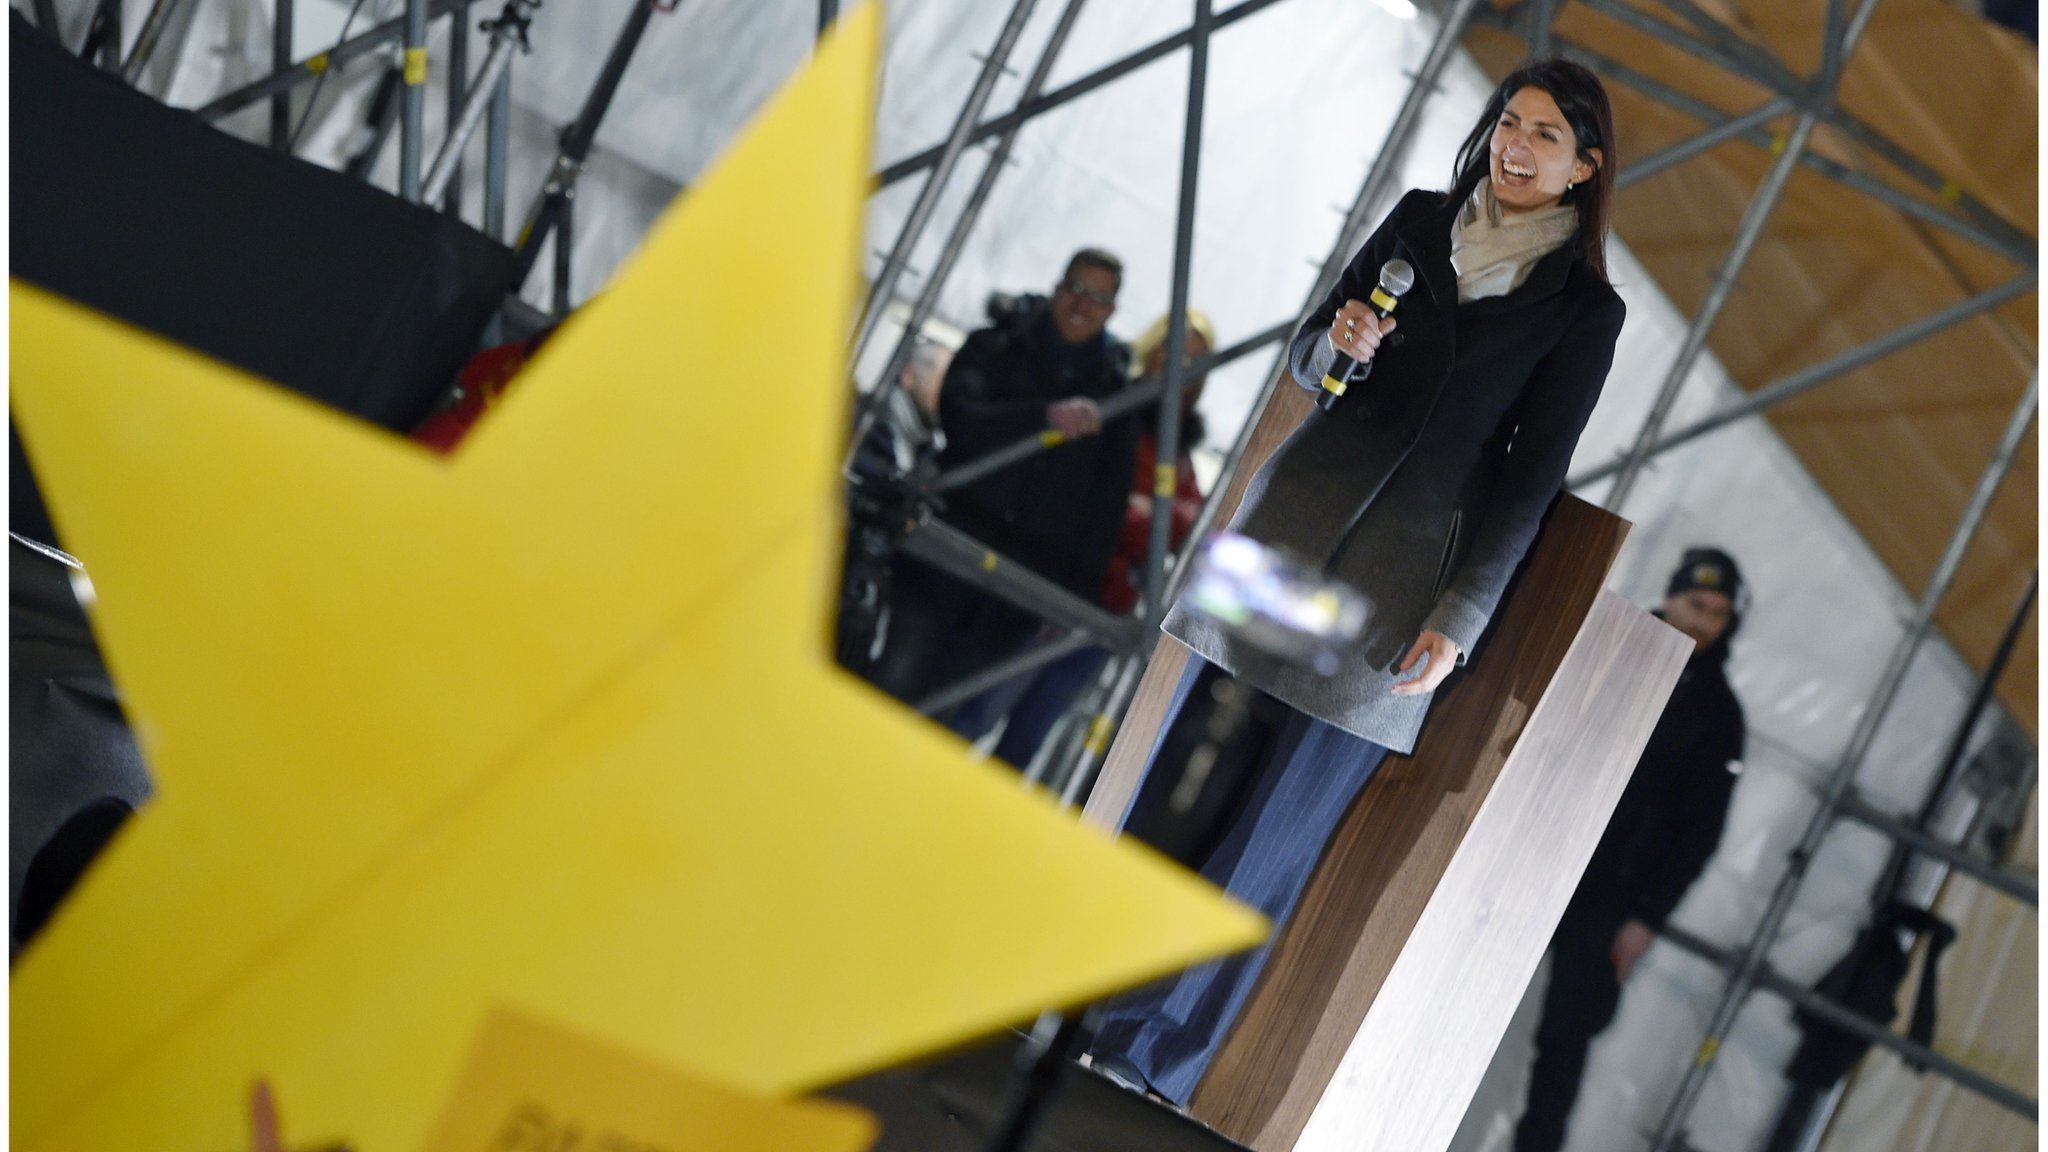 Large gold star is seen in the foreground as Five Star Movement mayor of Rome, Virginia Raggi, addresses supporters in Rome (March 2, 2018)